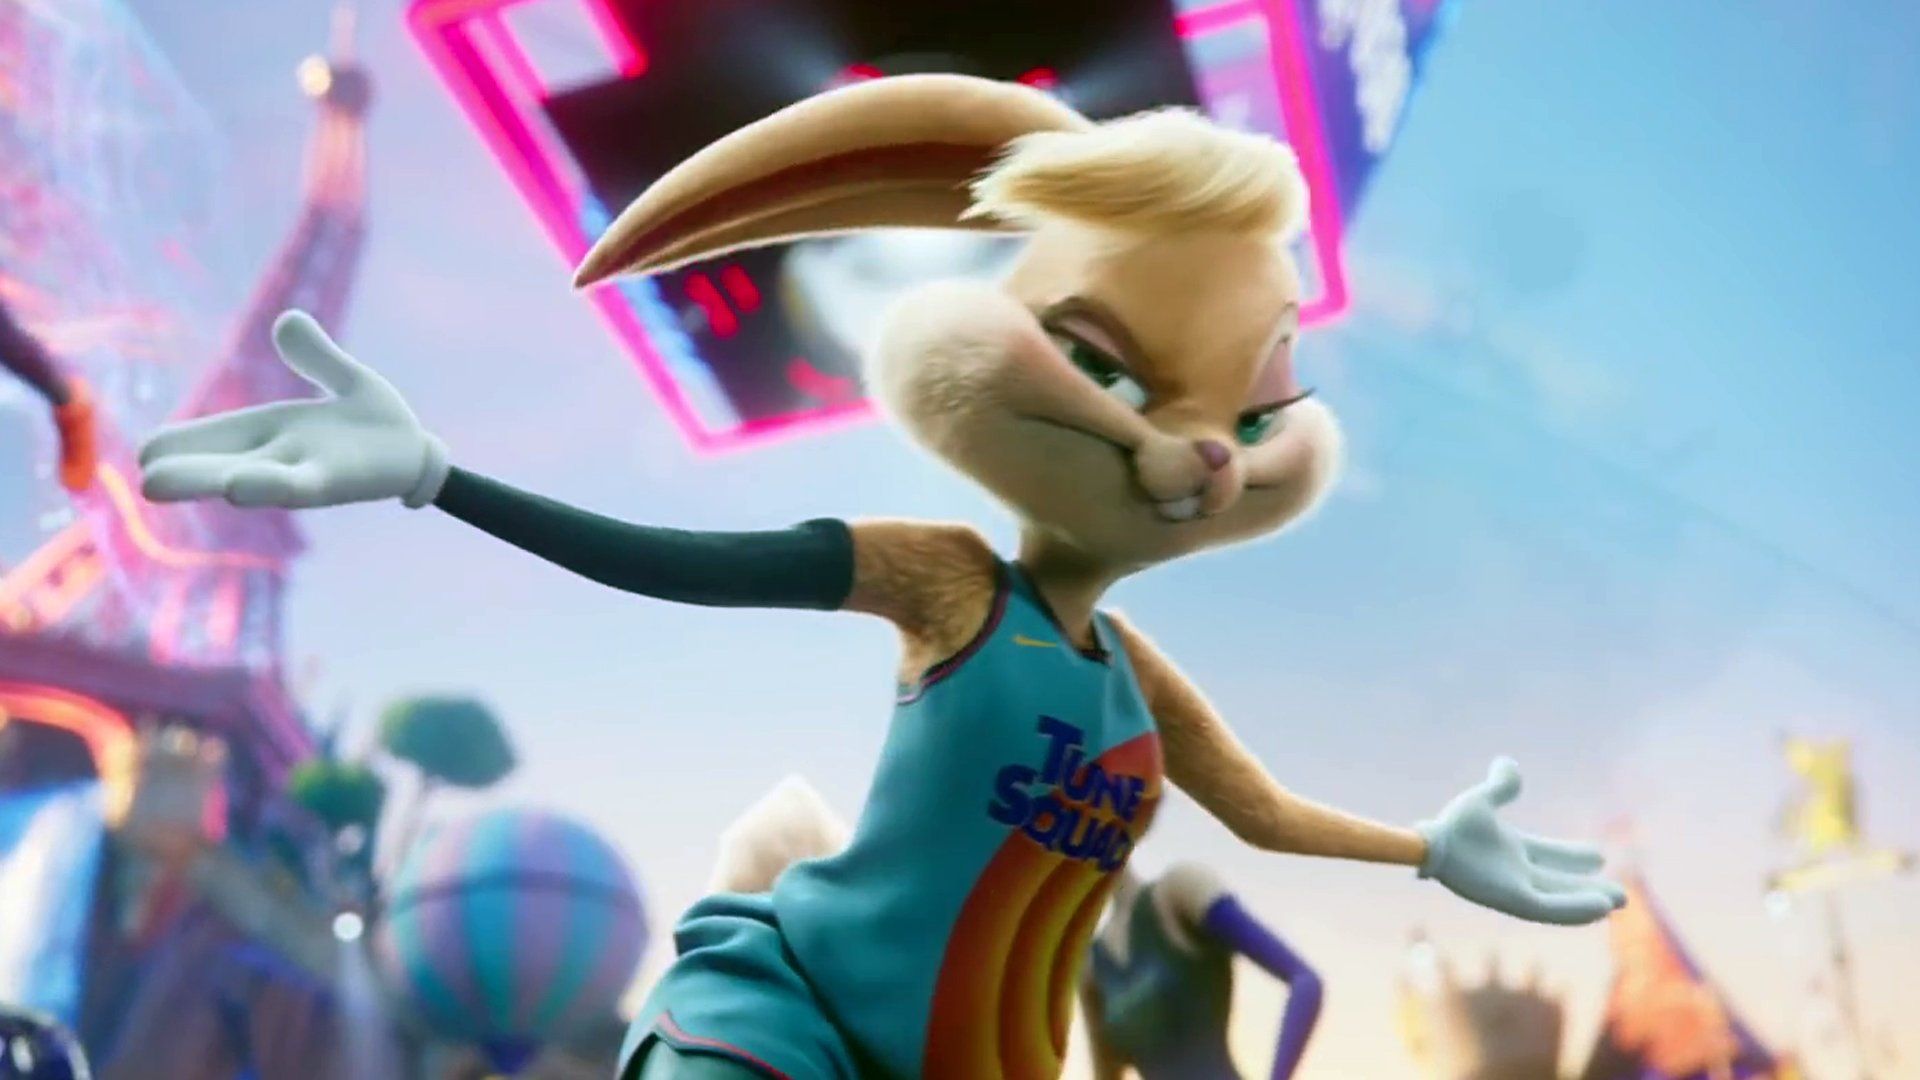 Space Jam 2 Zendaya Lola Bunny clip is roasted by fans calling for an 'actual voice actor'